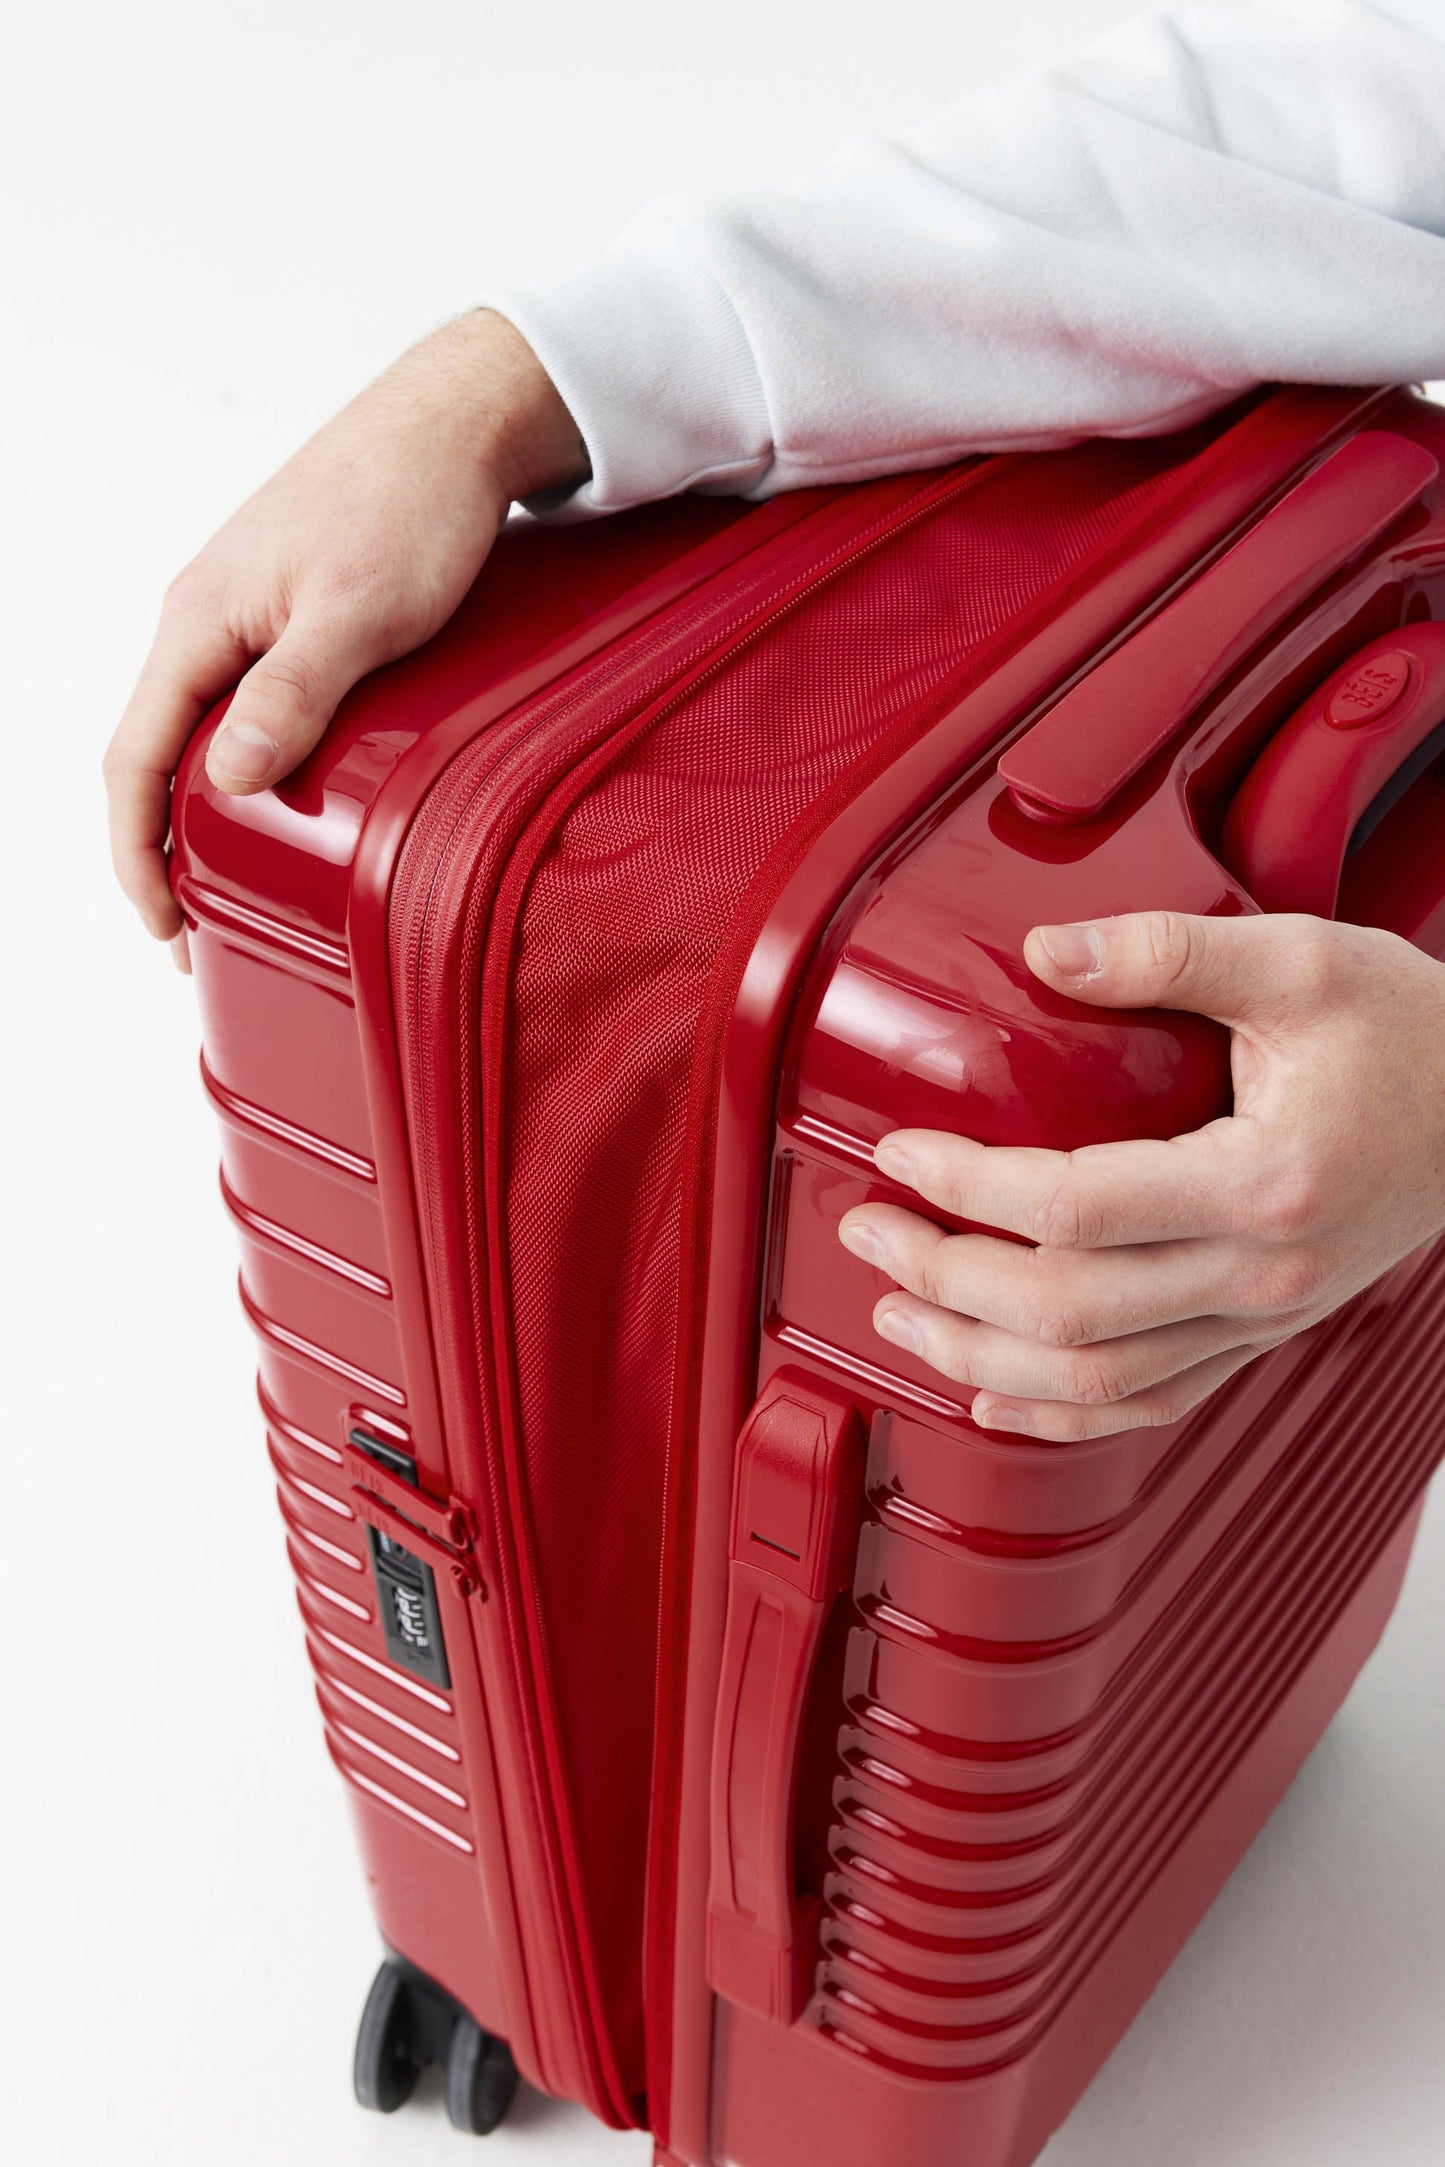 Le Carry-On Roller en Text Me Red